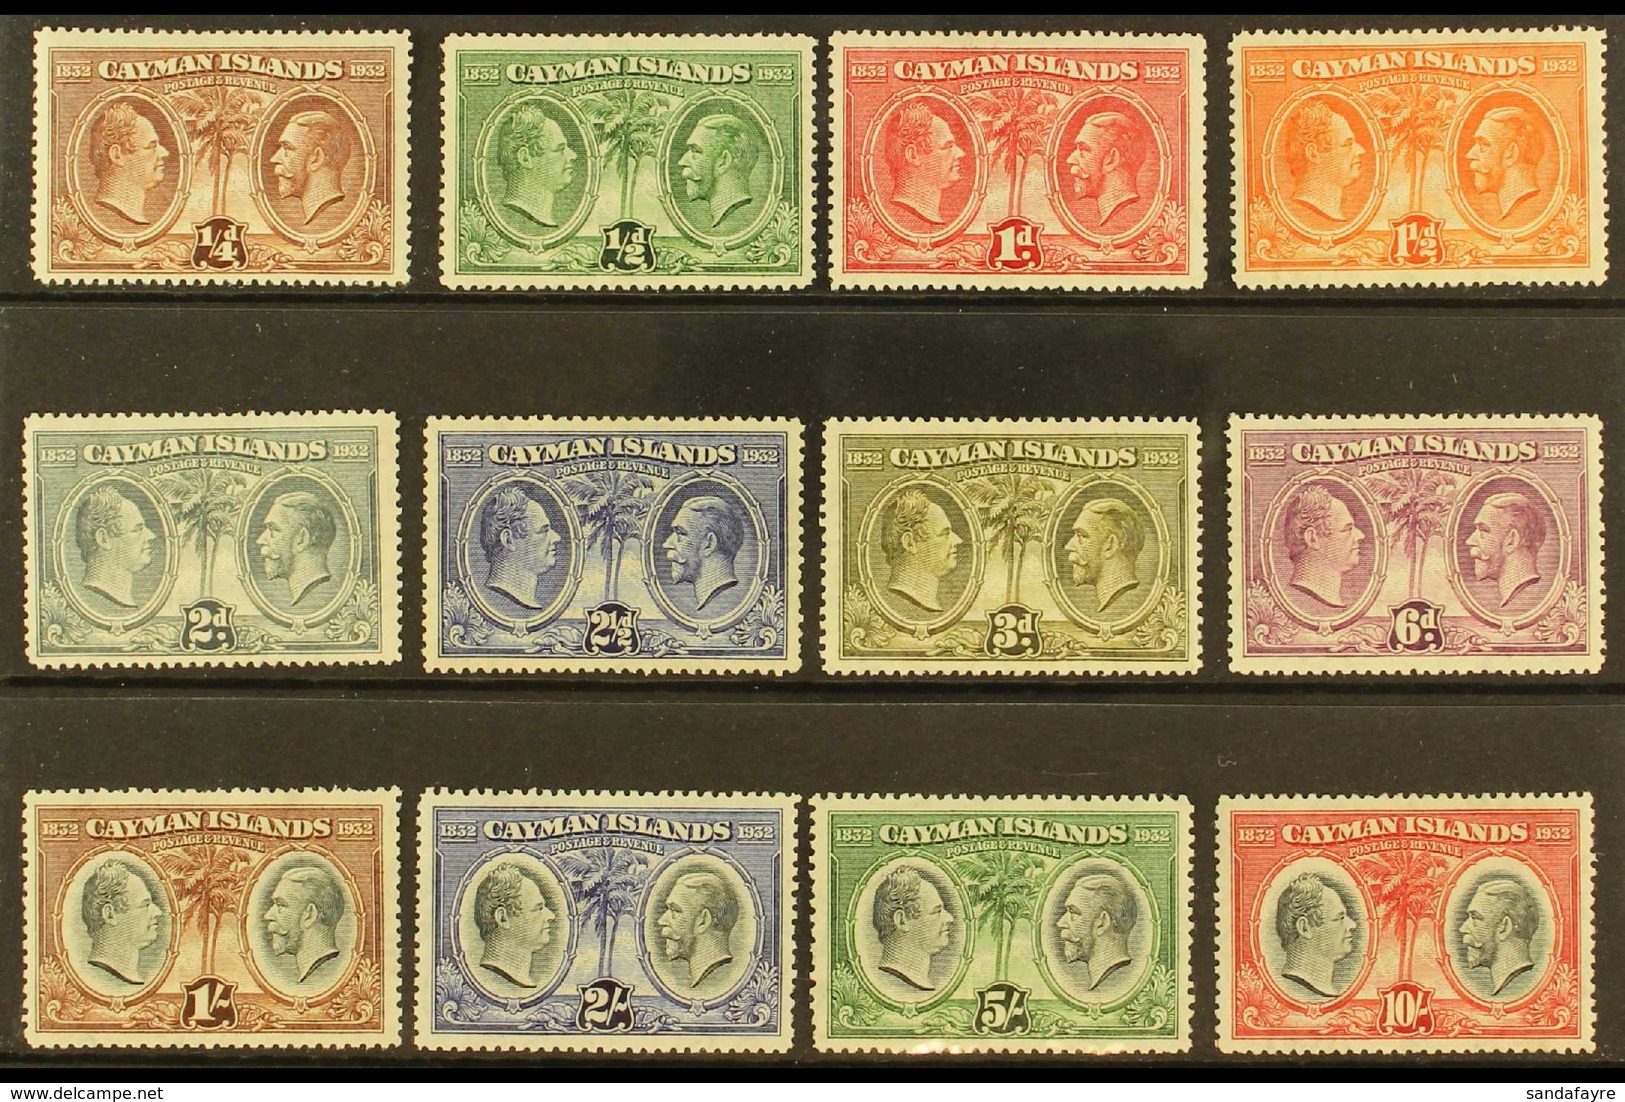 1932 Centenary Of The Justices & Vestry Set, SG 84/95, Fine Mint (12 Stamps) For More Images, Please Visit Http://www.sa - Kaimaninseln